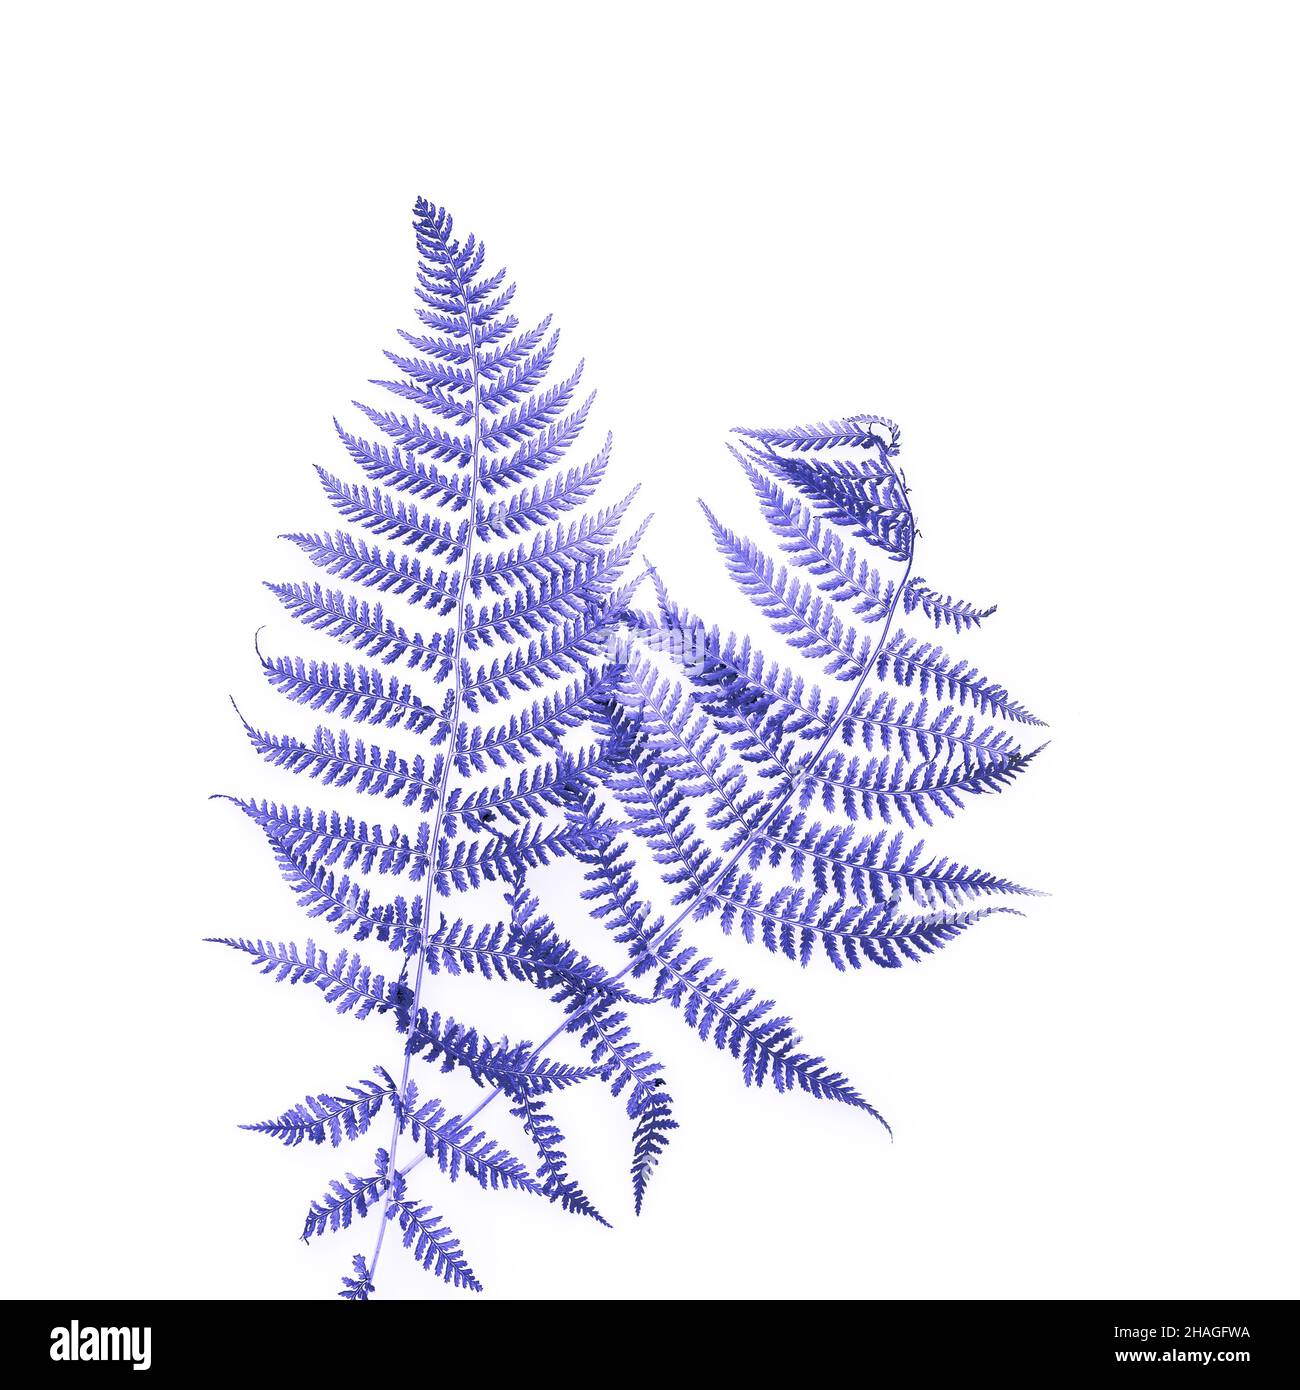 Fern leaf shadow on white background. Color toning. Stock Photo